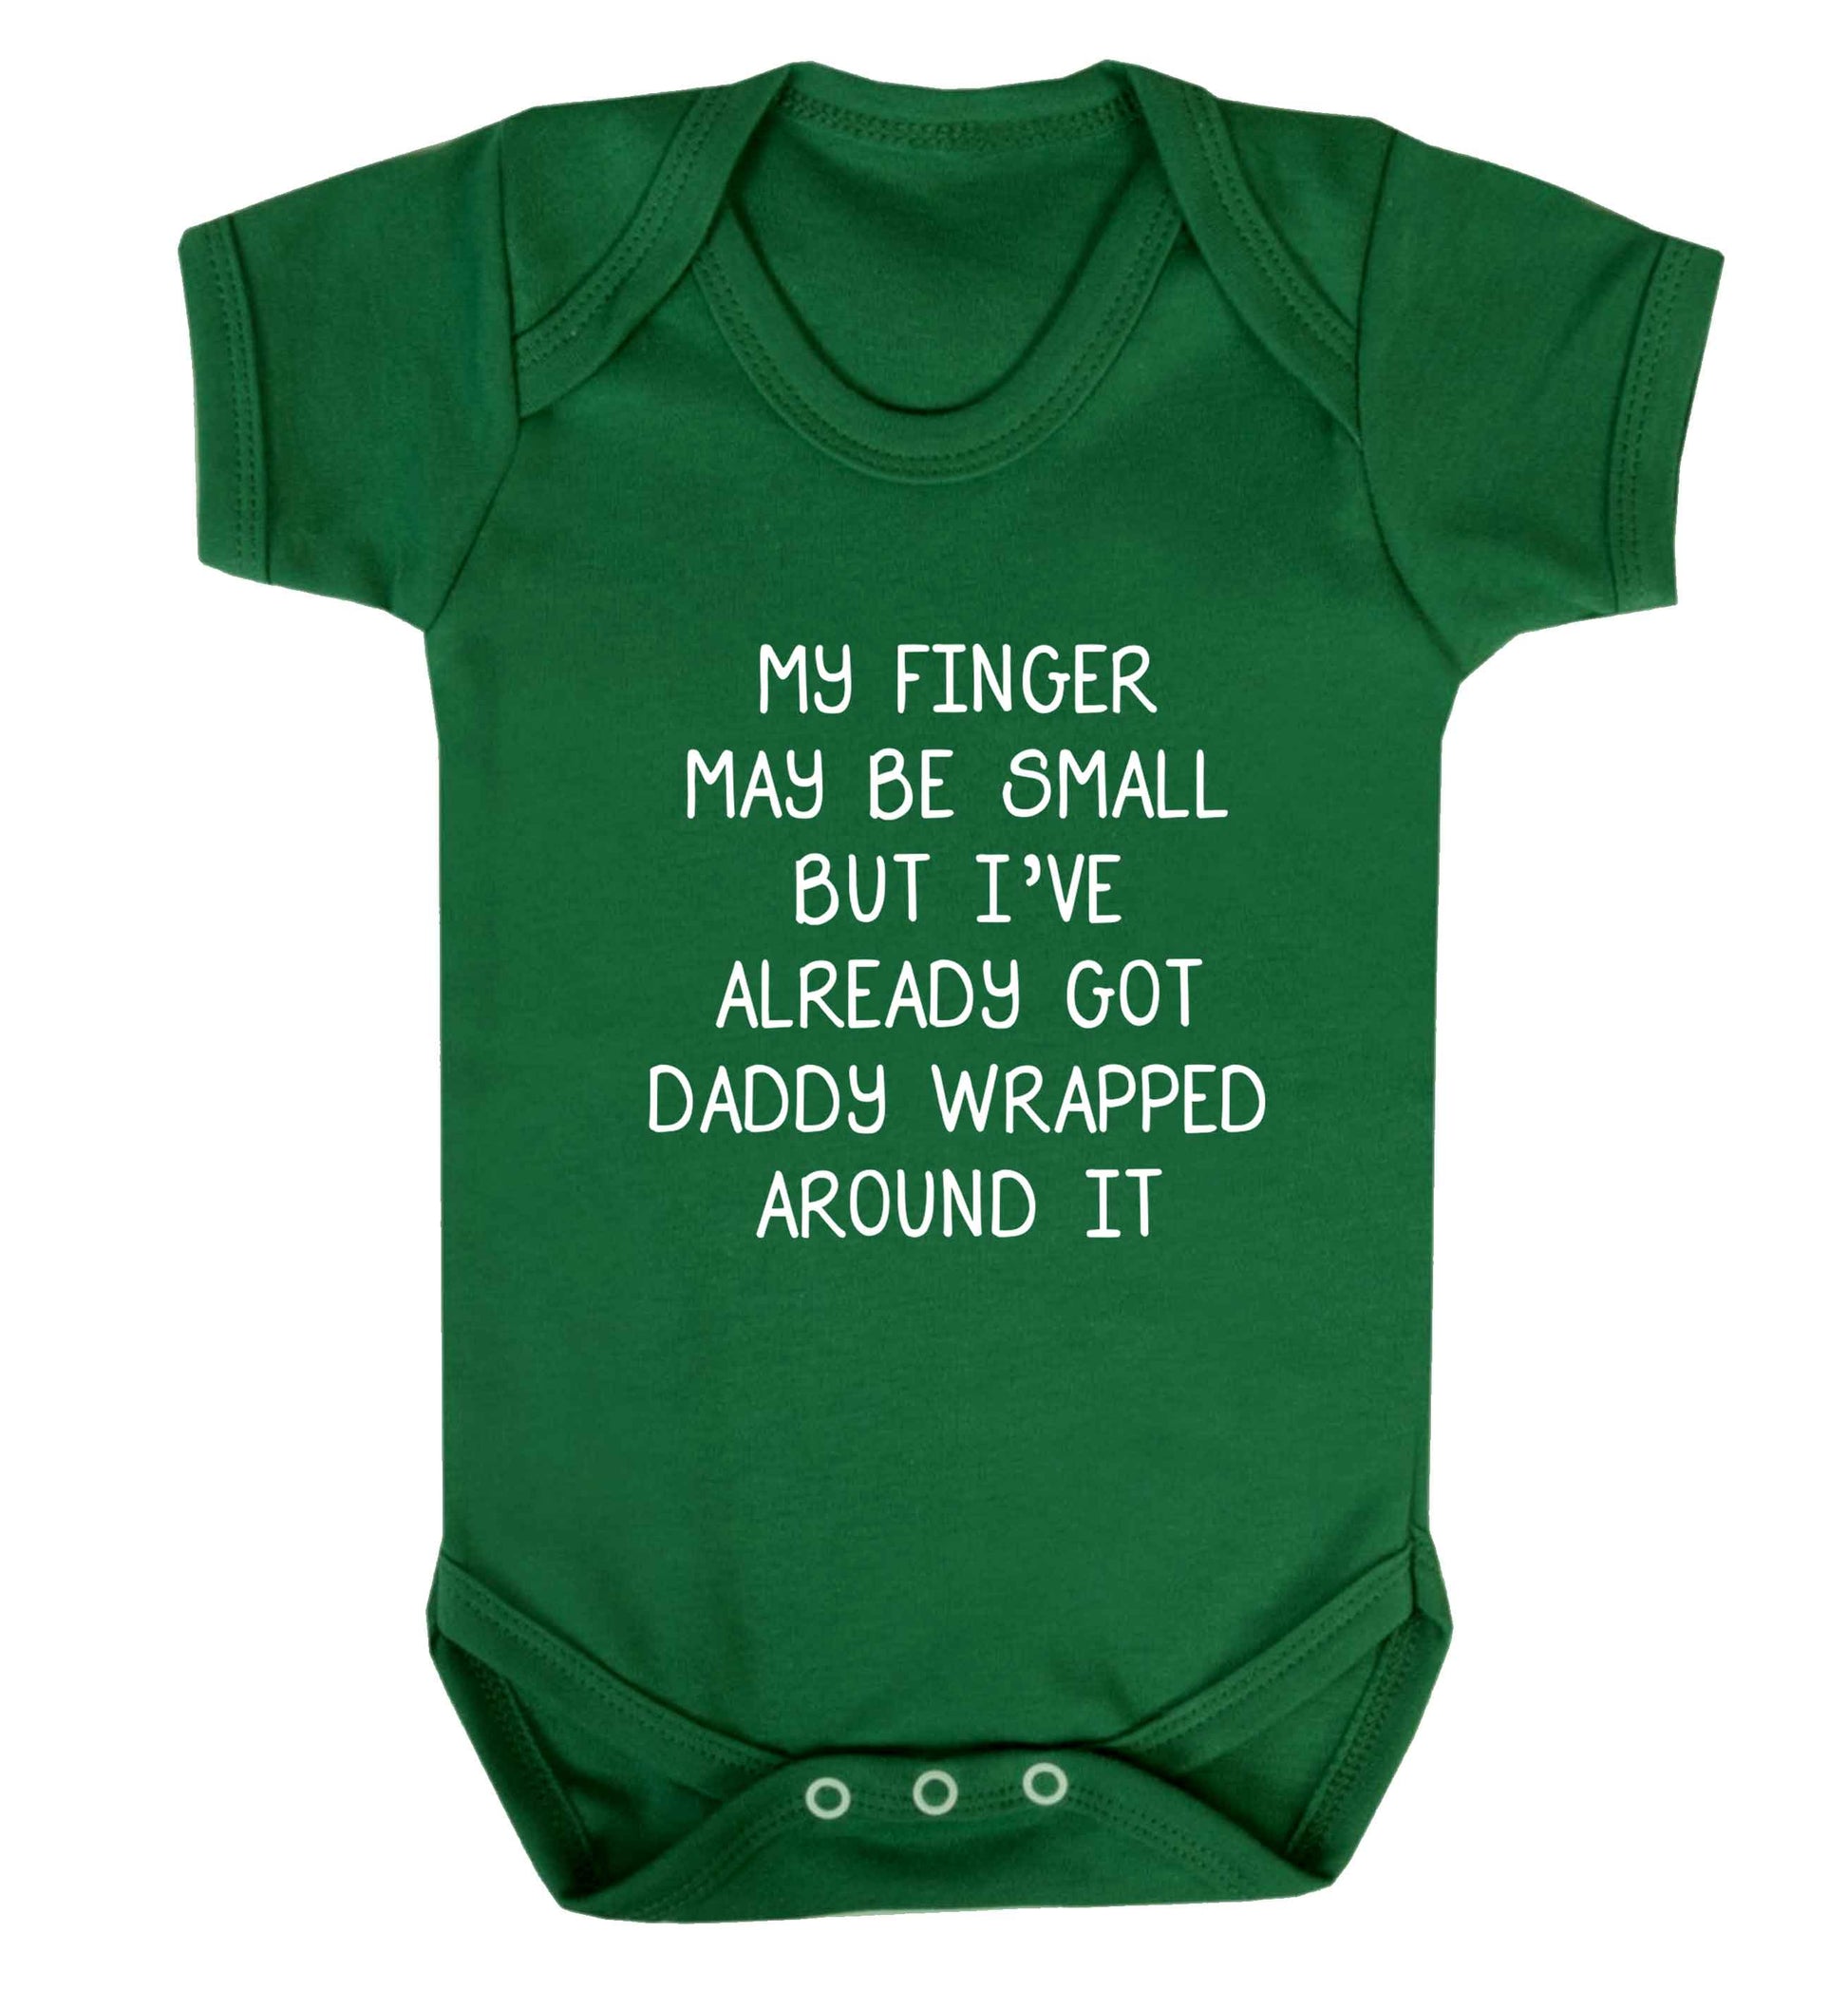 My finger may be small but I've already got daddy wrapped around it baby vest green 18-24 months